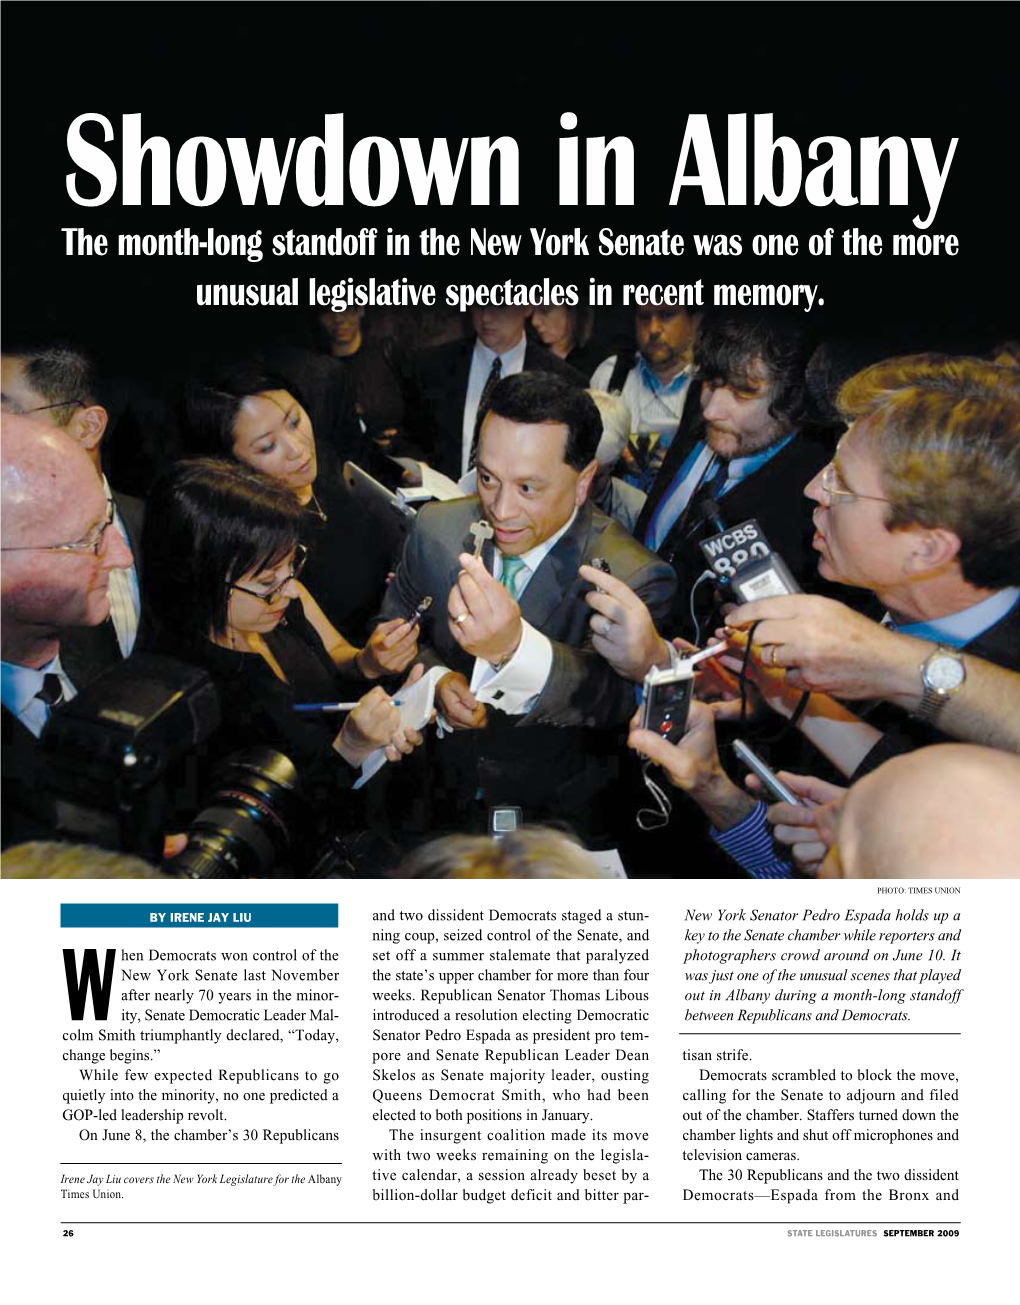 Showdown in Albany the Month-Long Standoff in the New York Senate Was One of the More Unusual Legislative Spectacles in Recent Memory